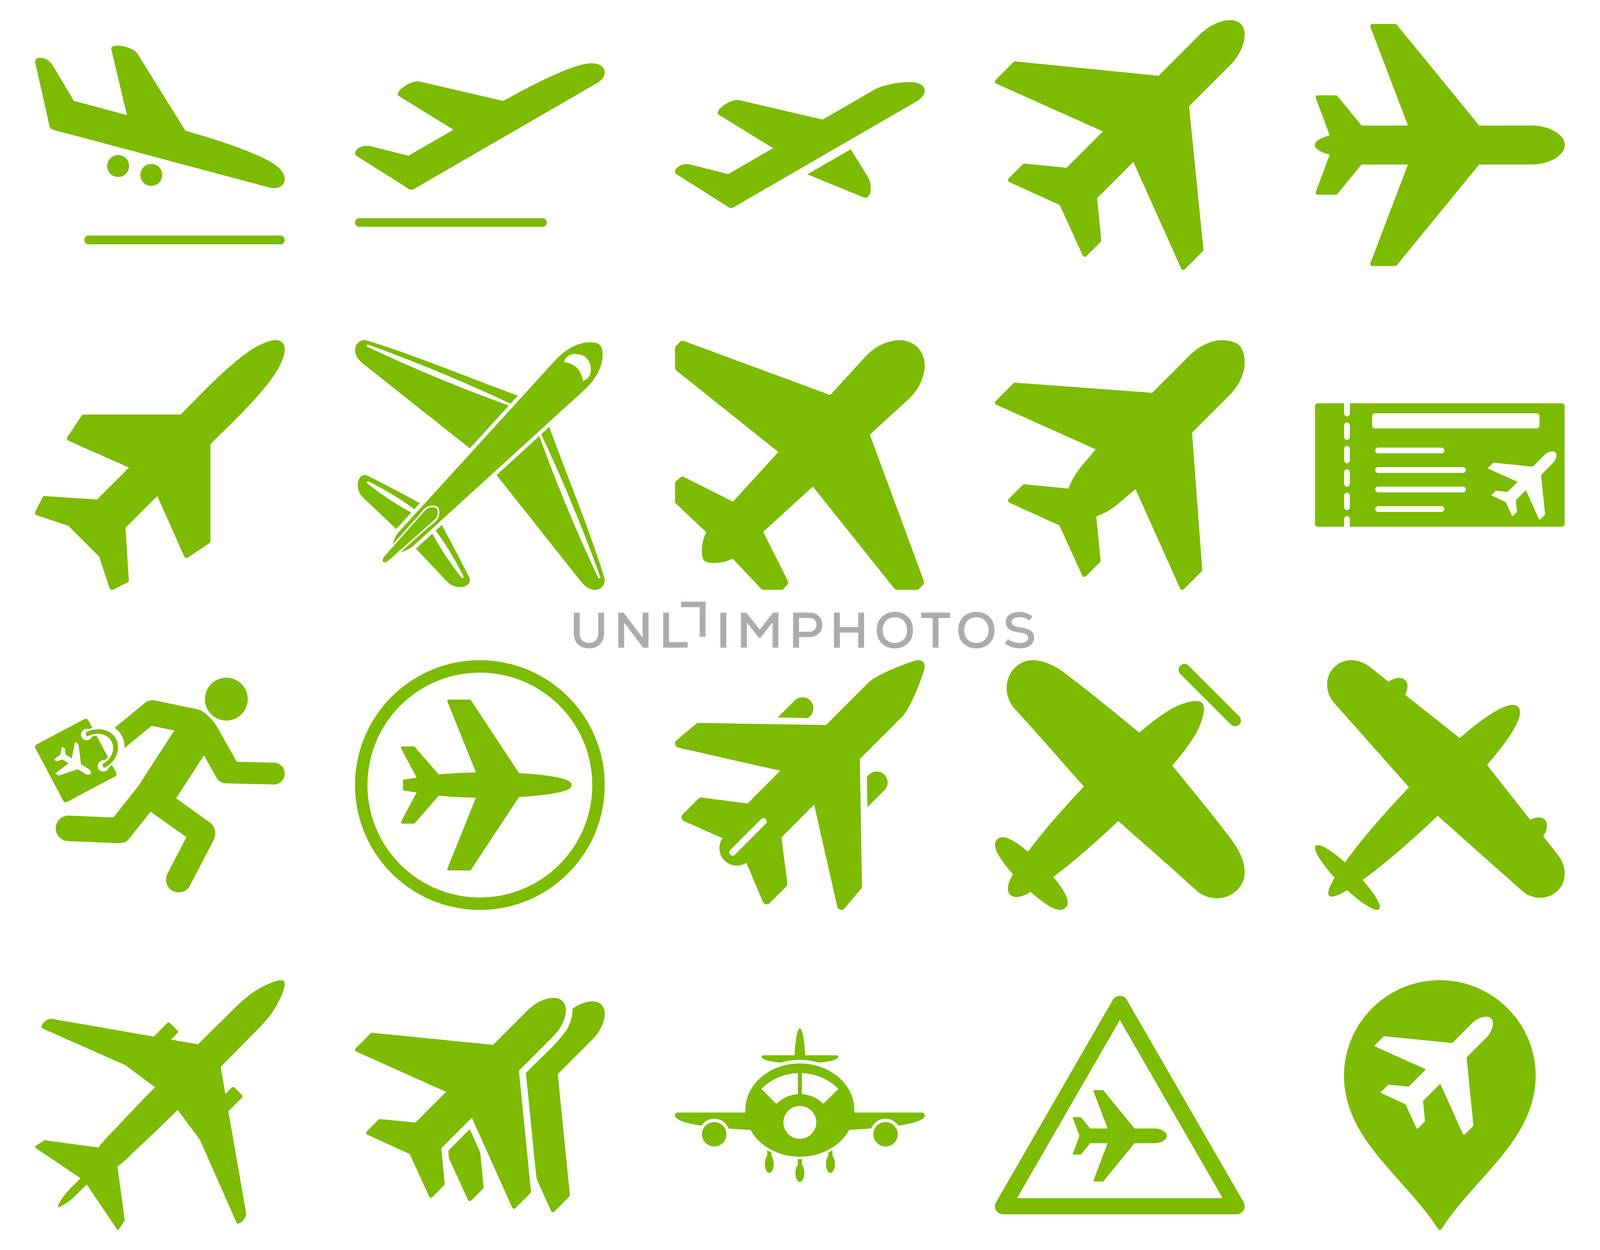 Aviation Icon Set by ahasoft